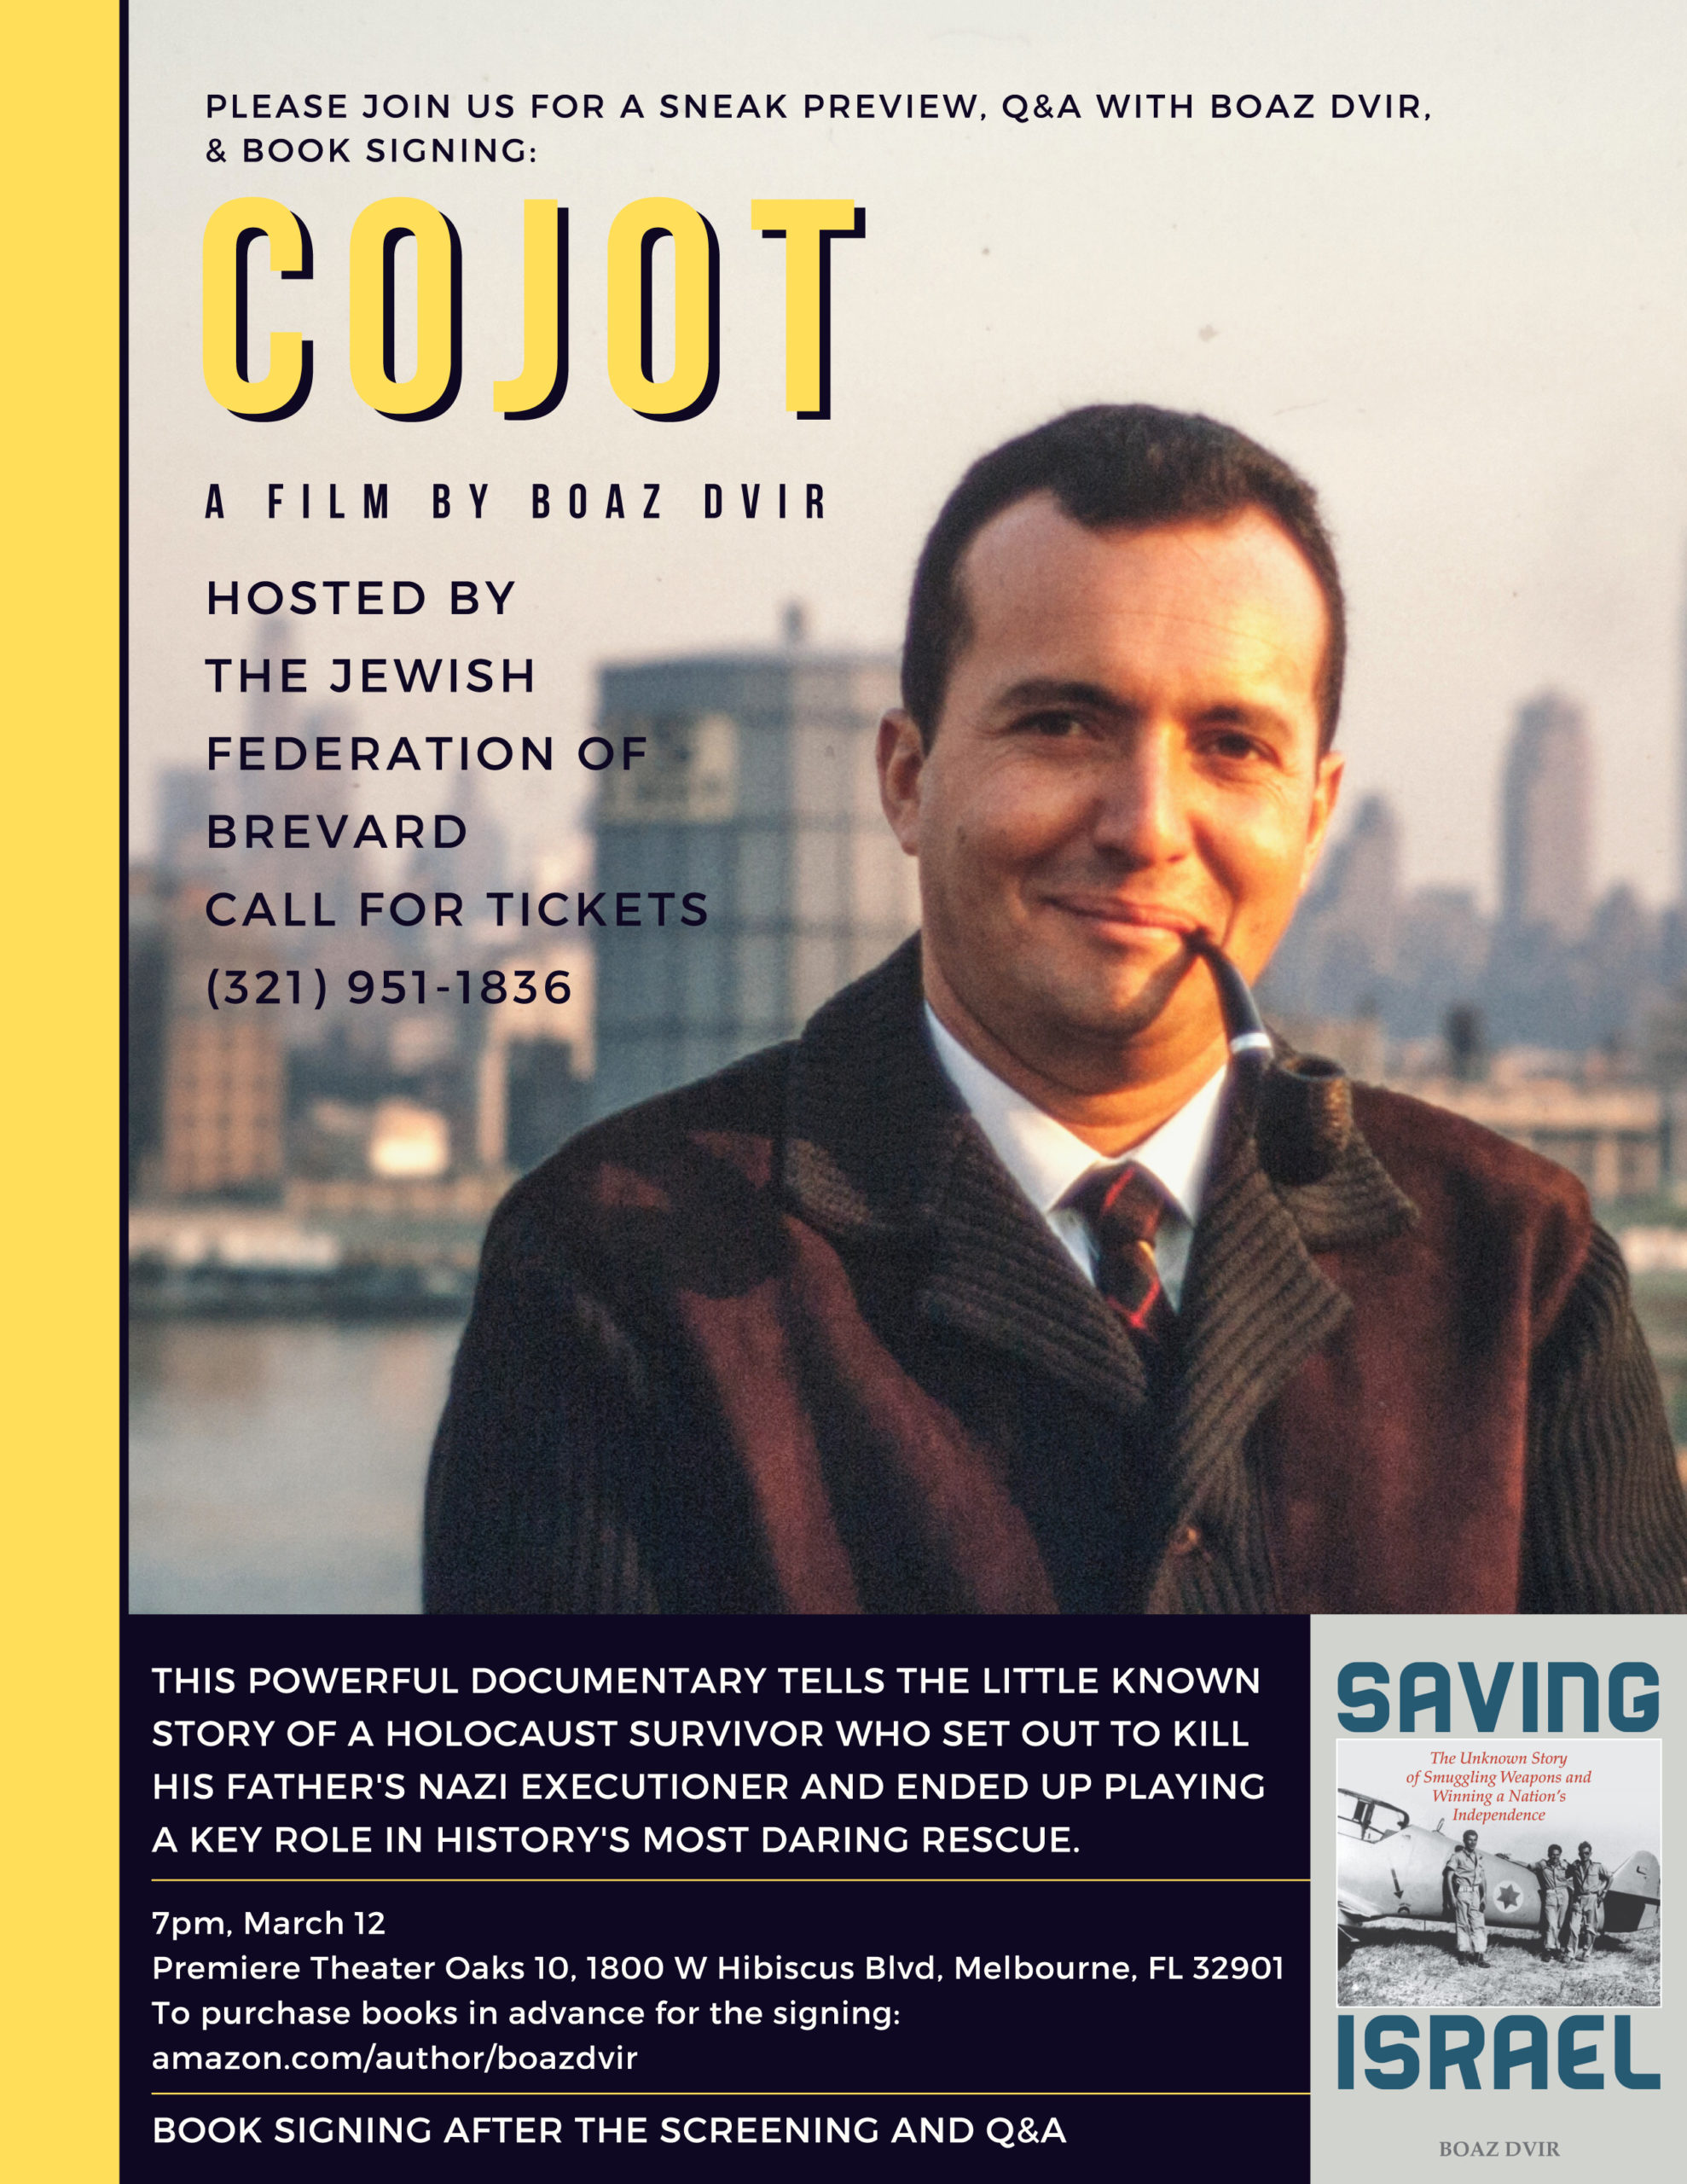 Jewish Federation of Brevard Hosts Preview of 'Cojot' on March 12 in Melbourne 